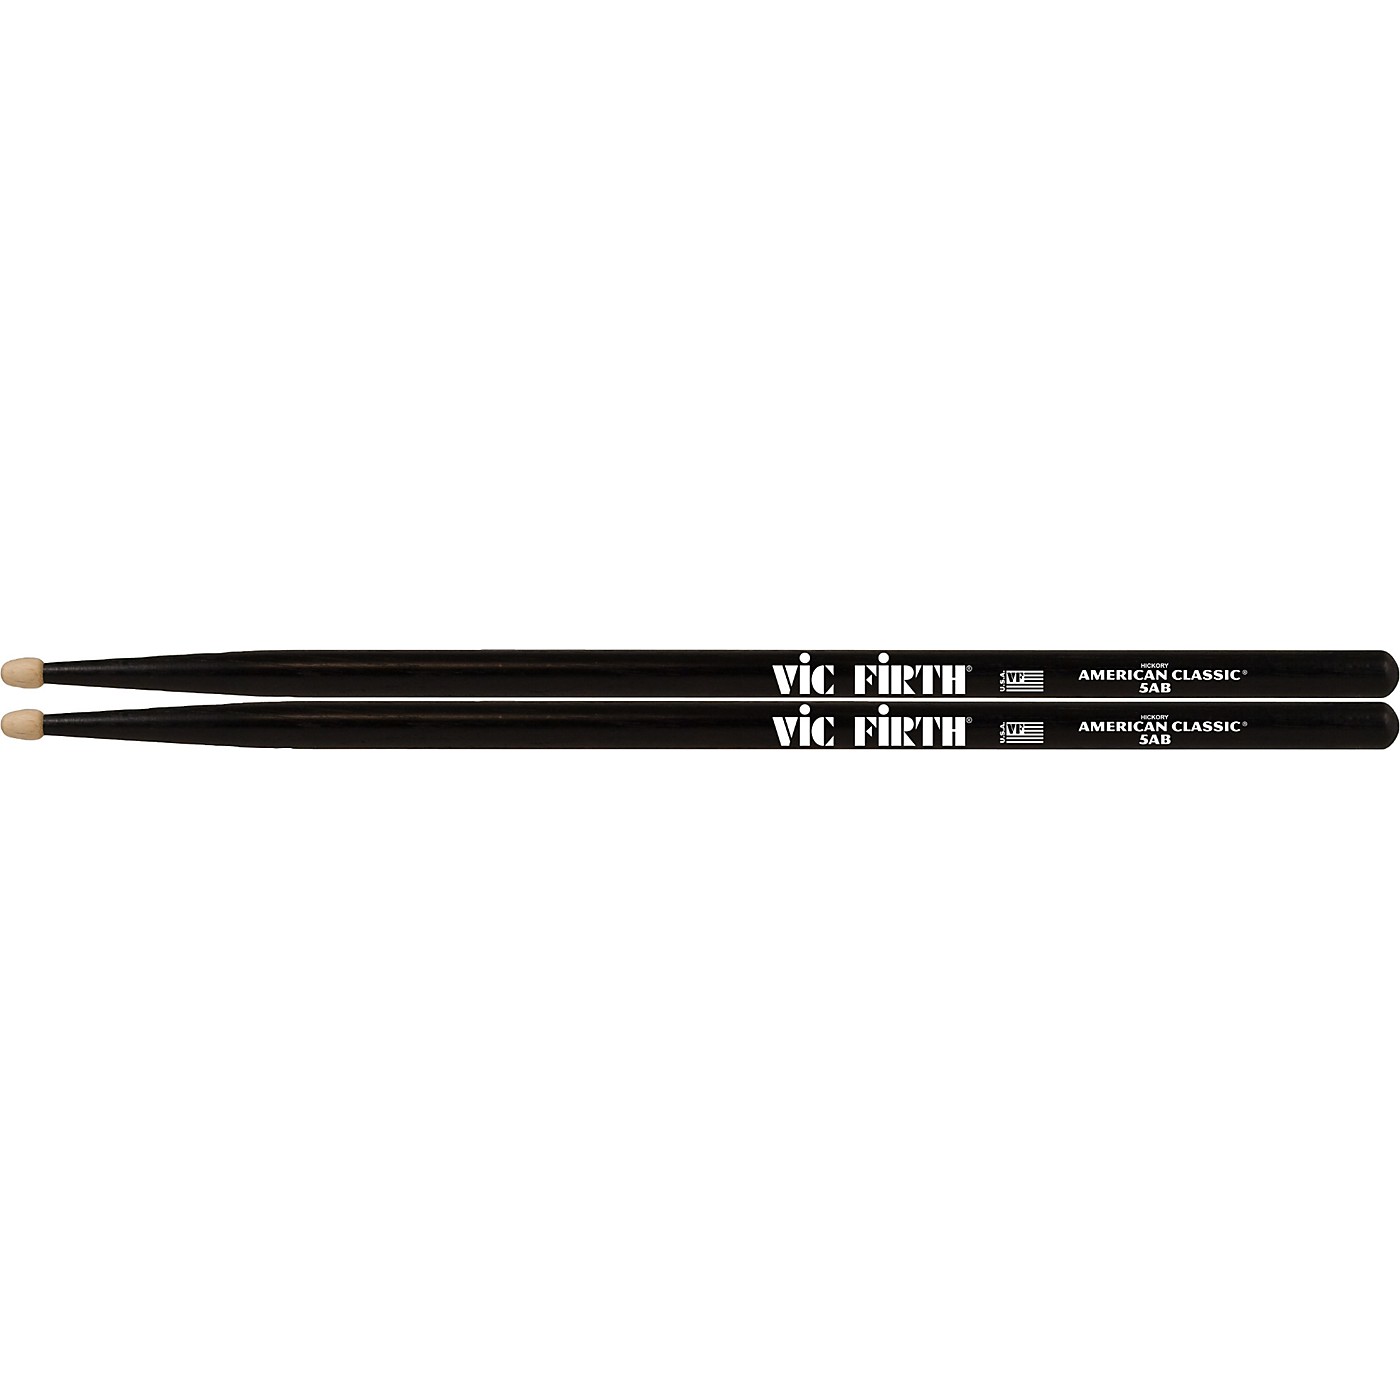 Vic Firth American Classic Drum Sticks With Black Finish thumbnail